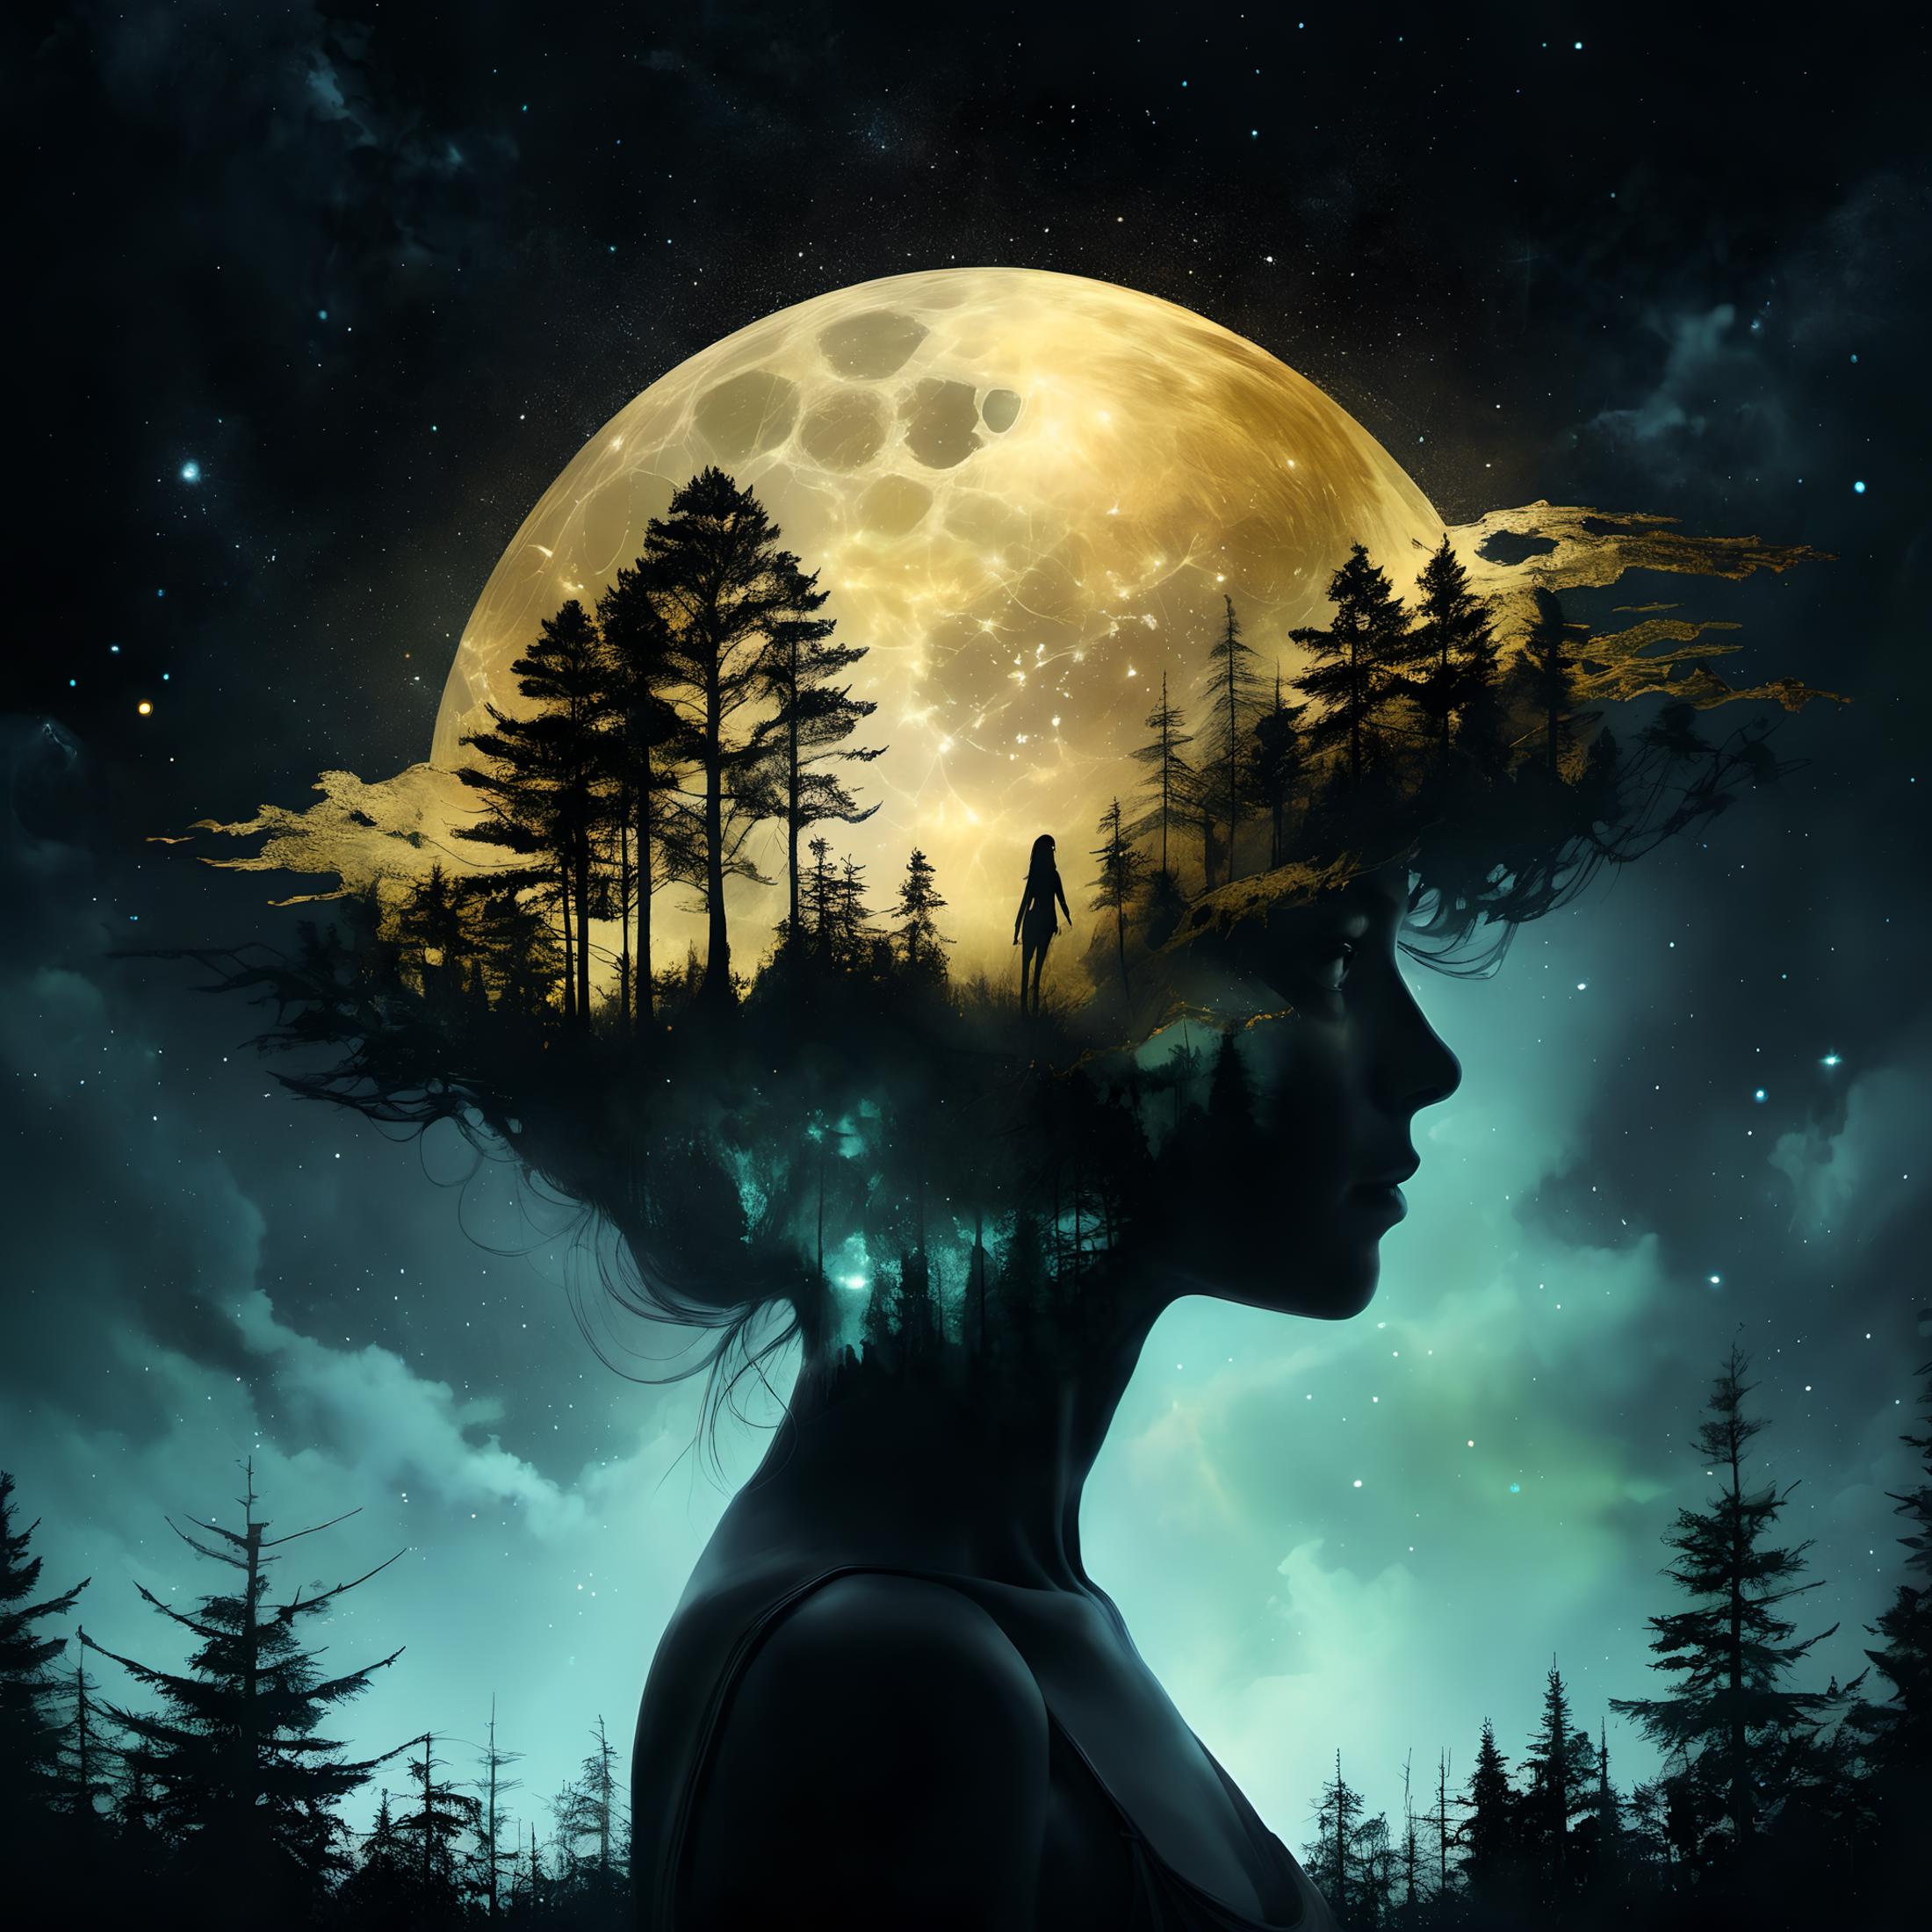 A woman with a moon on her head under a night sky.